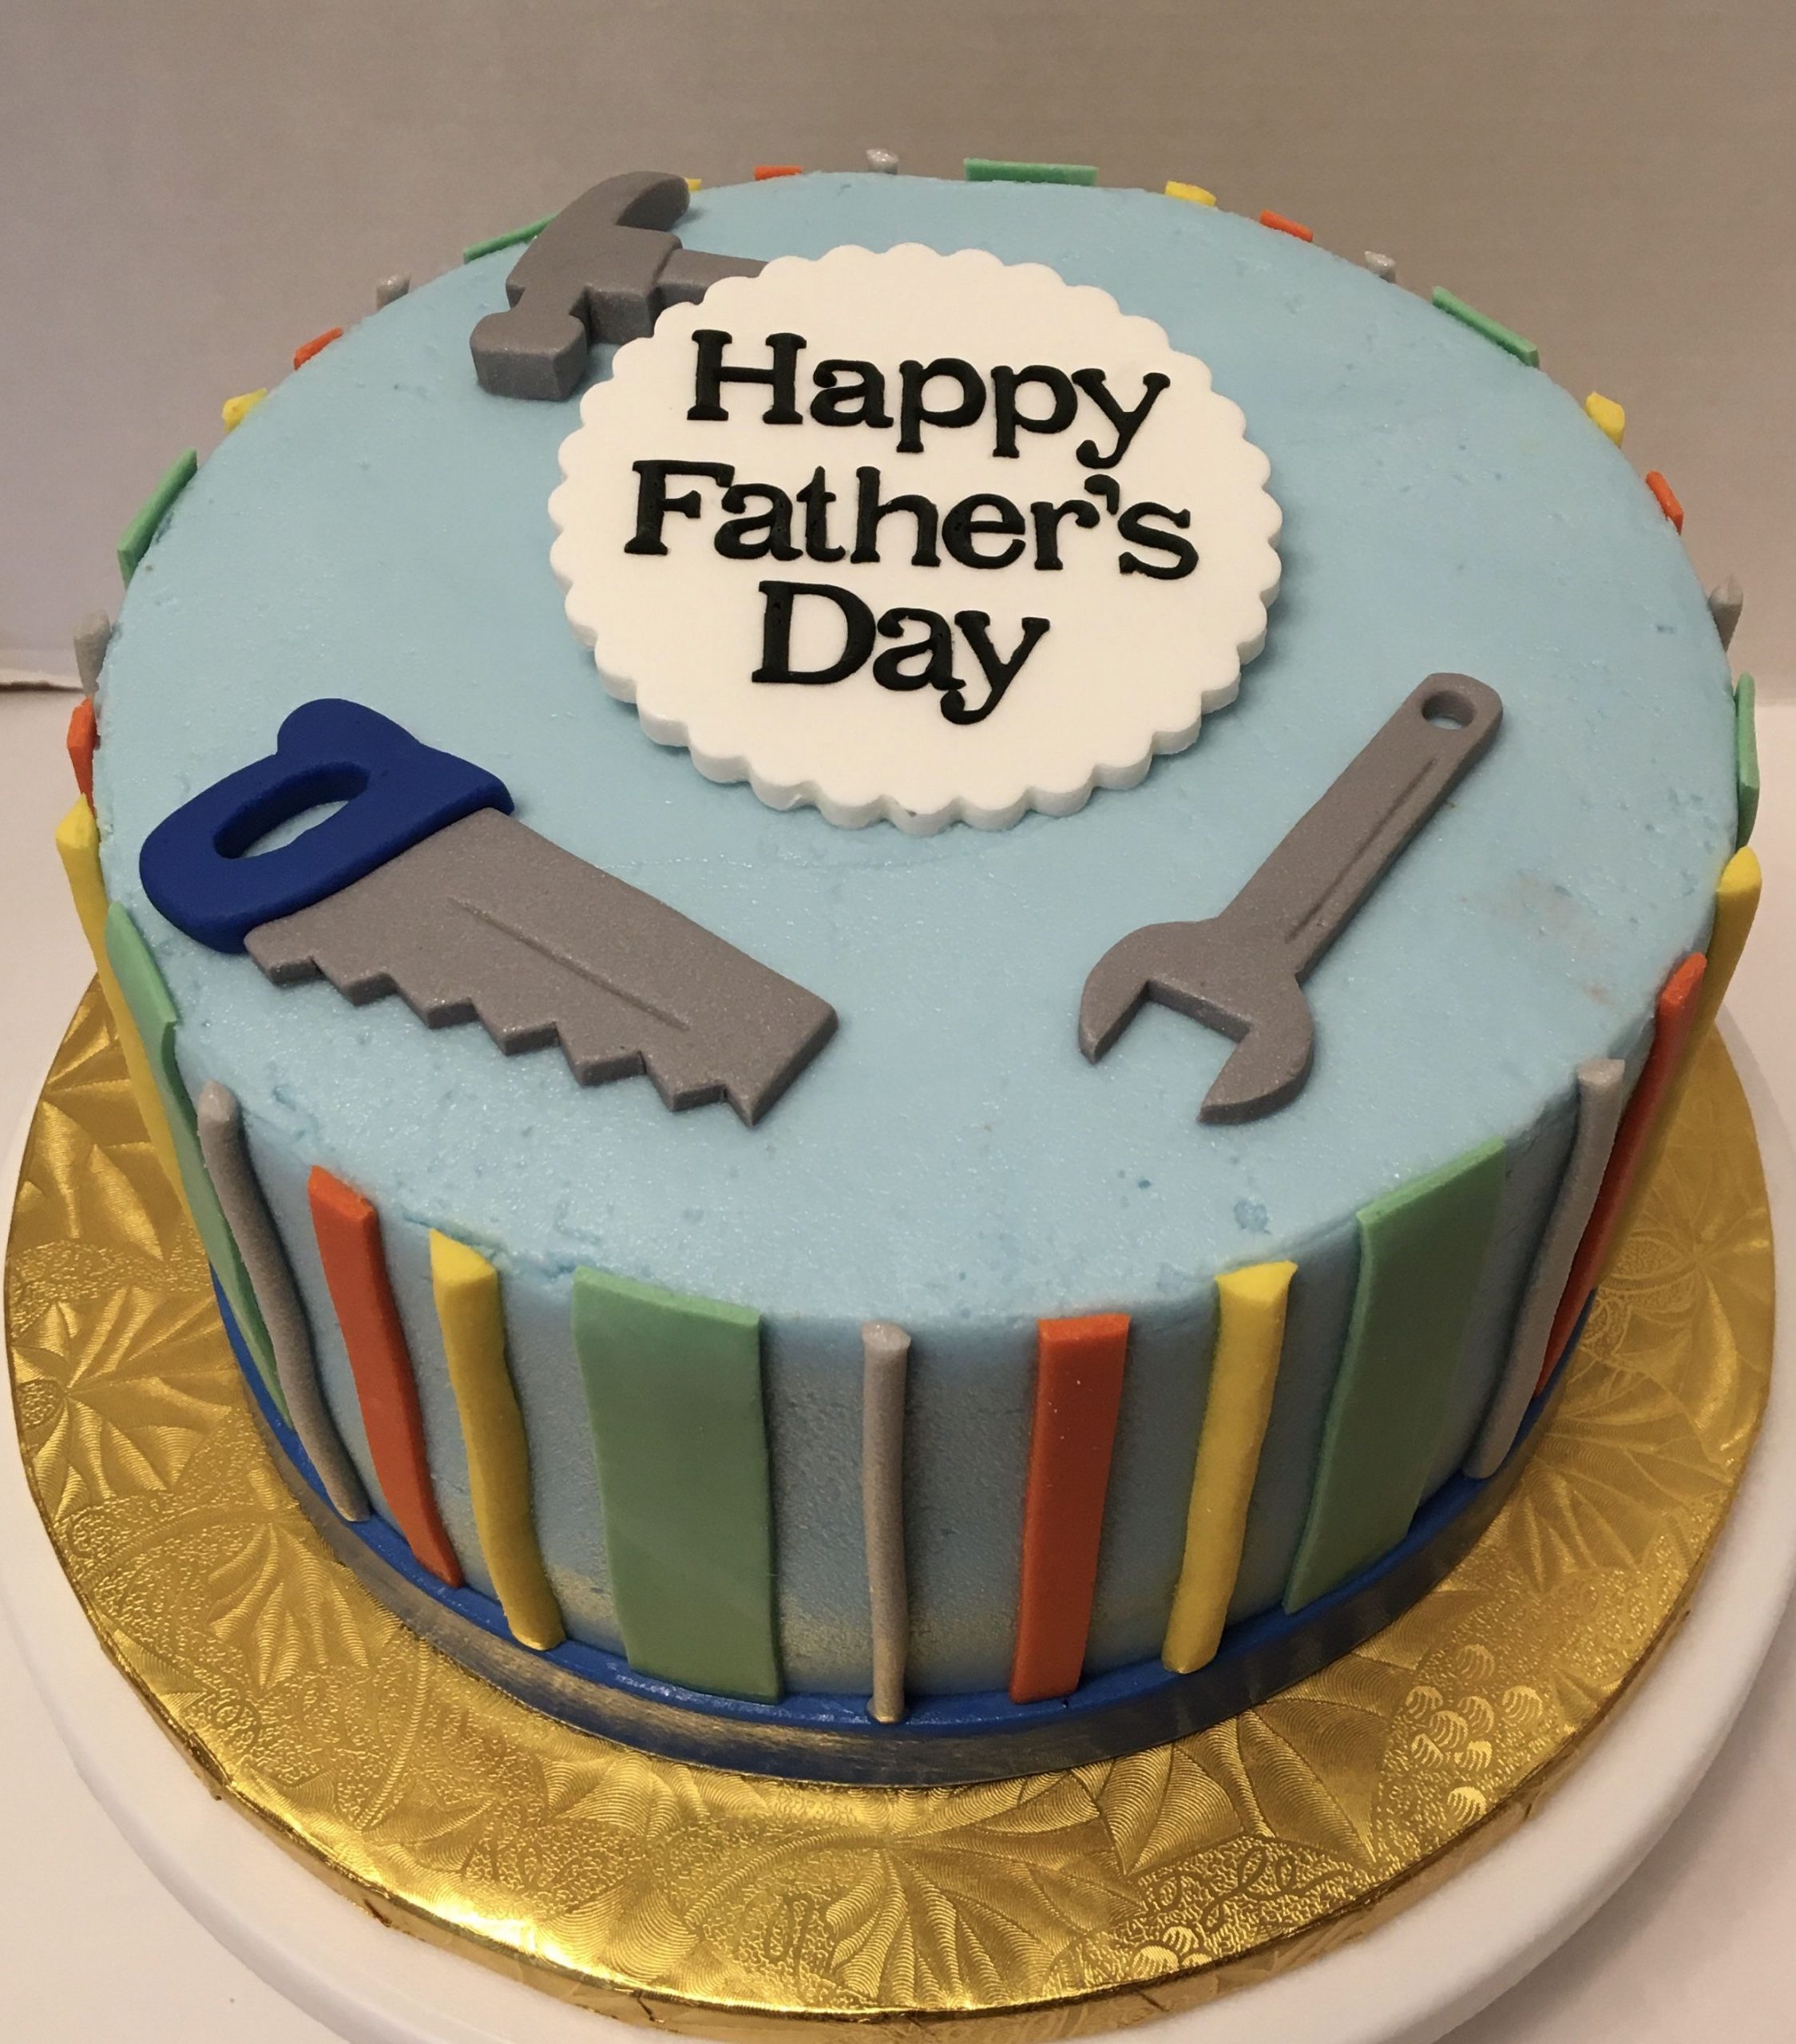 Deluxe Father's Day Cake-sgquangbinhtourist.com.vn